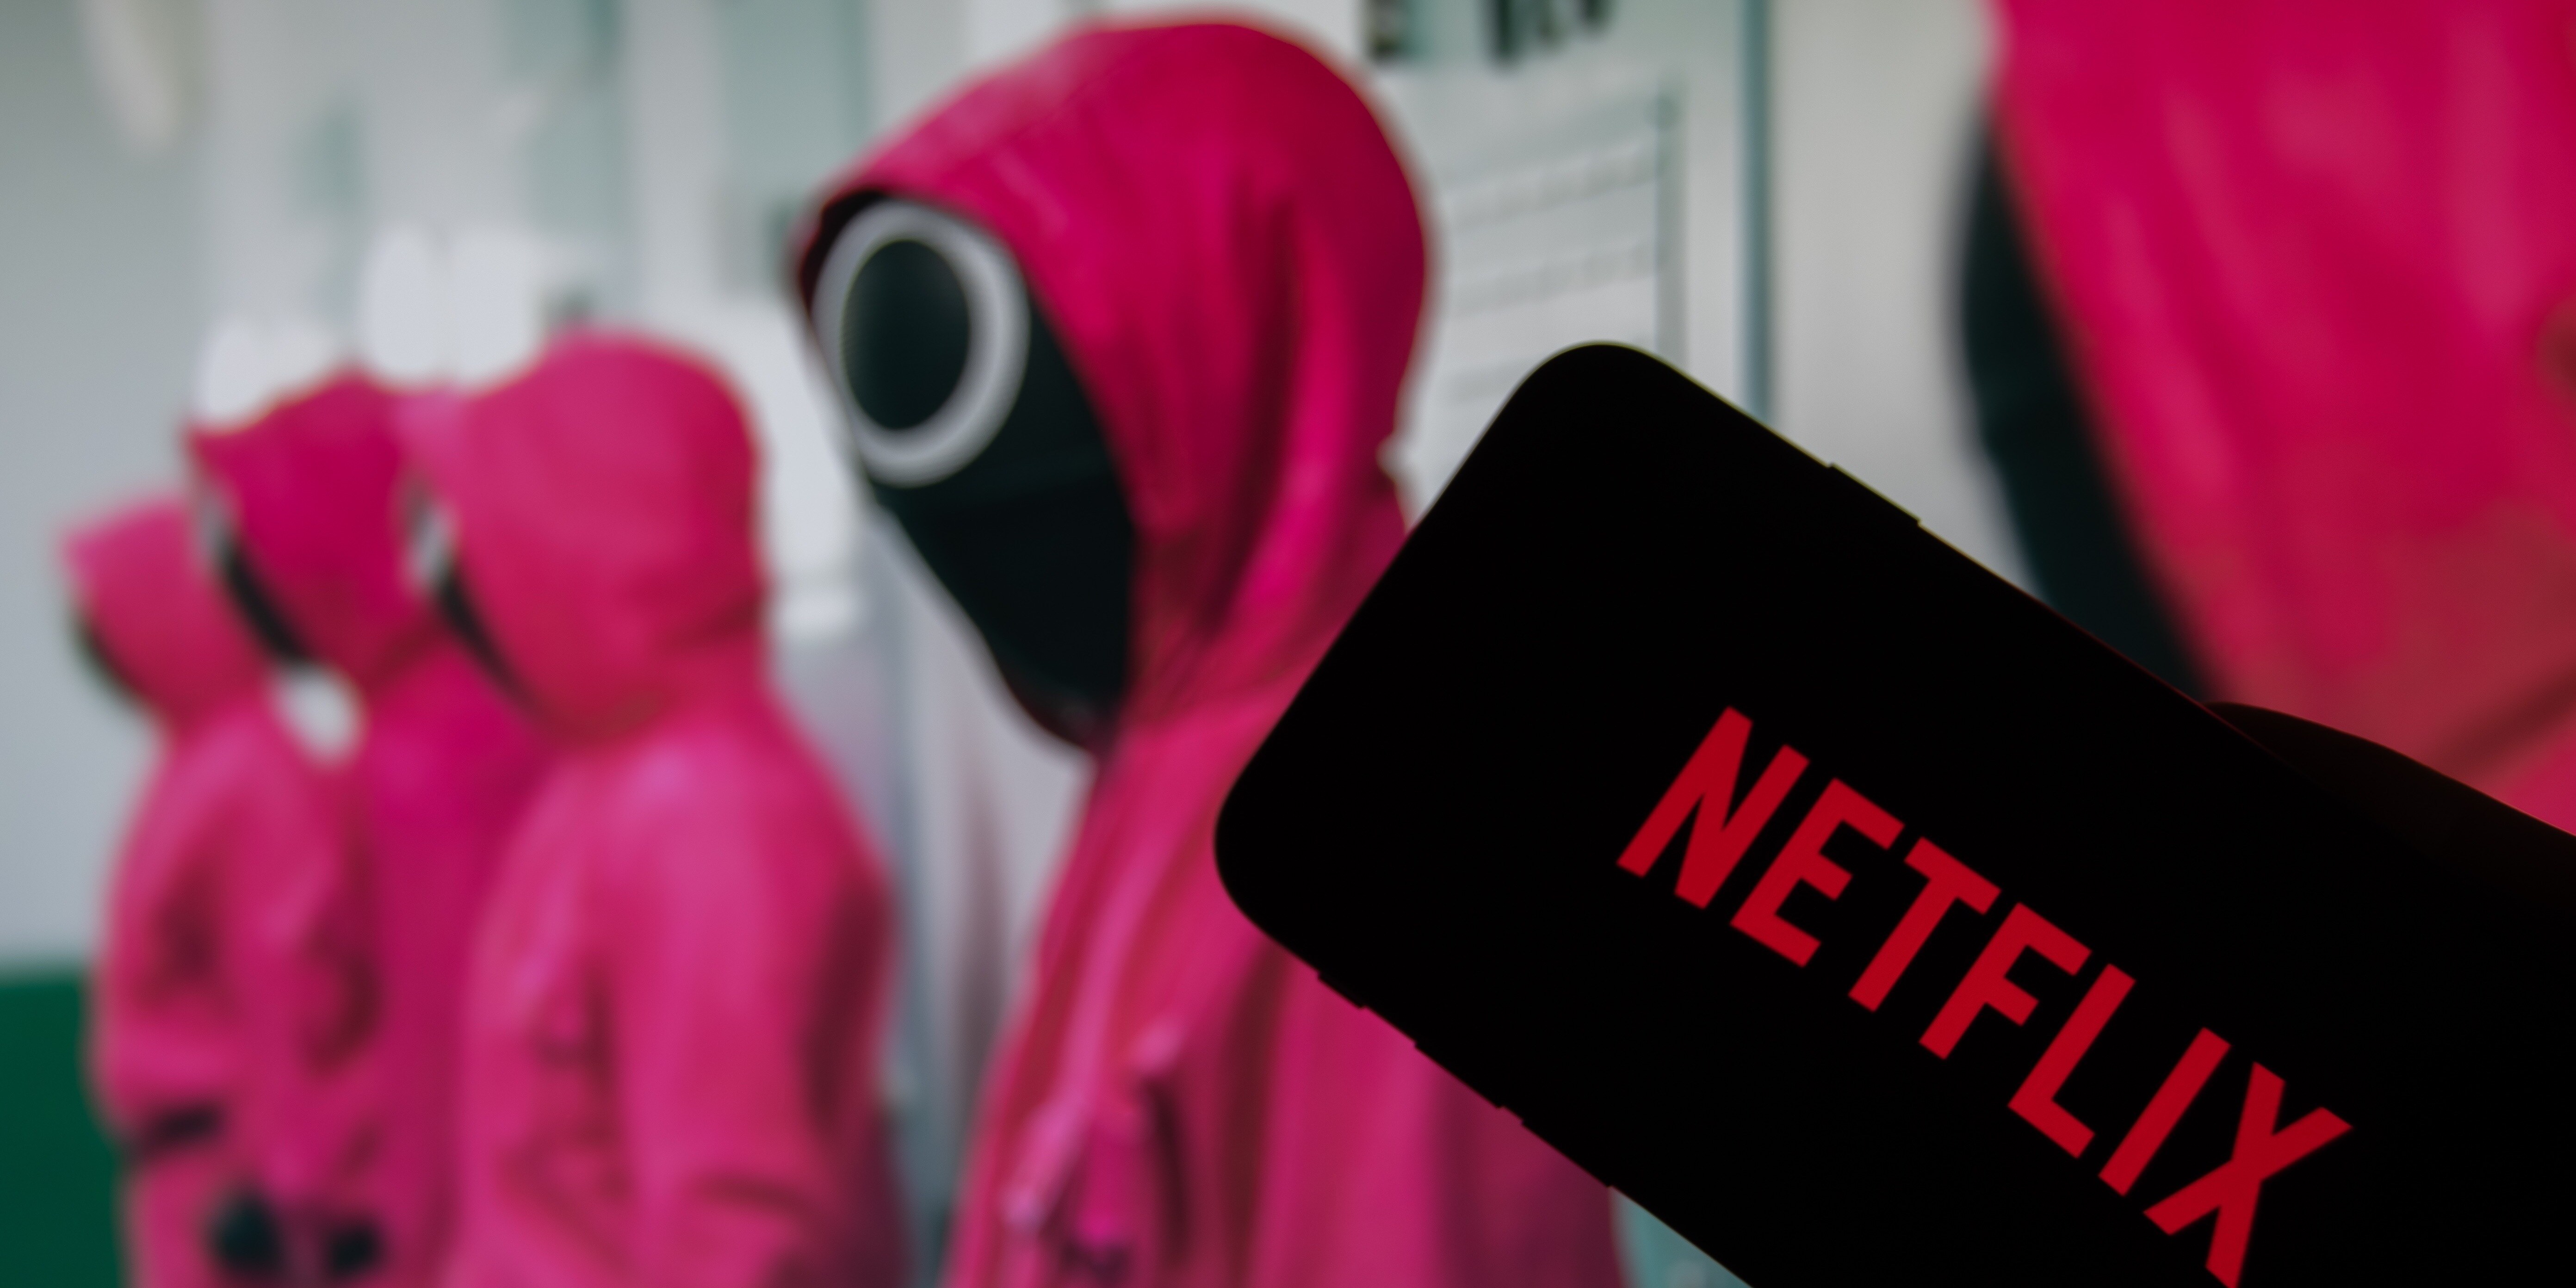 Contrast Security discovers Netflix OSS Genie bug that can lead to RCE during file upload